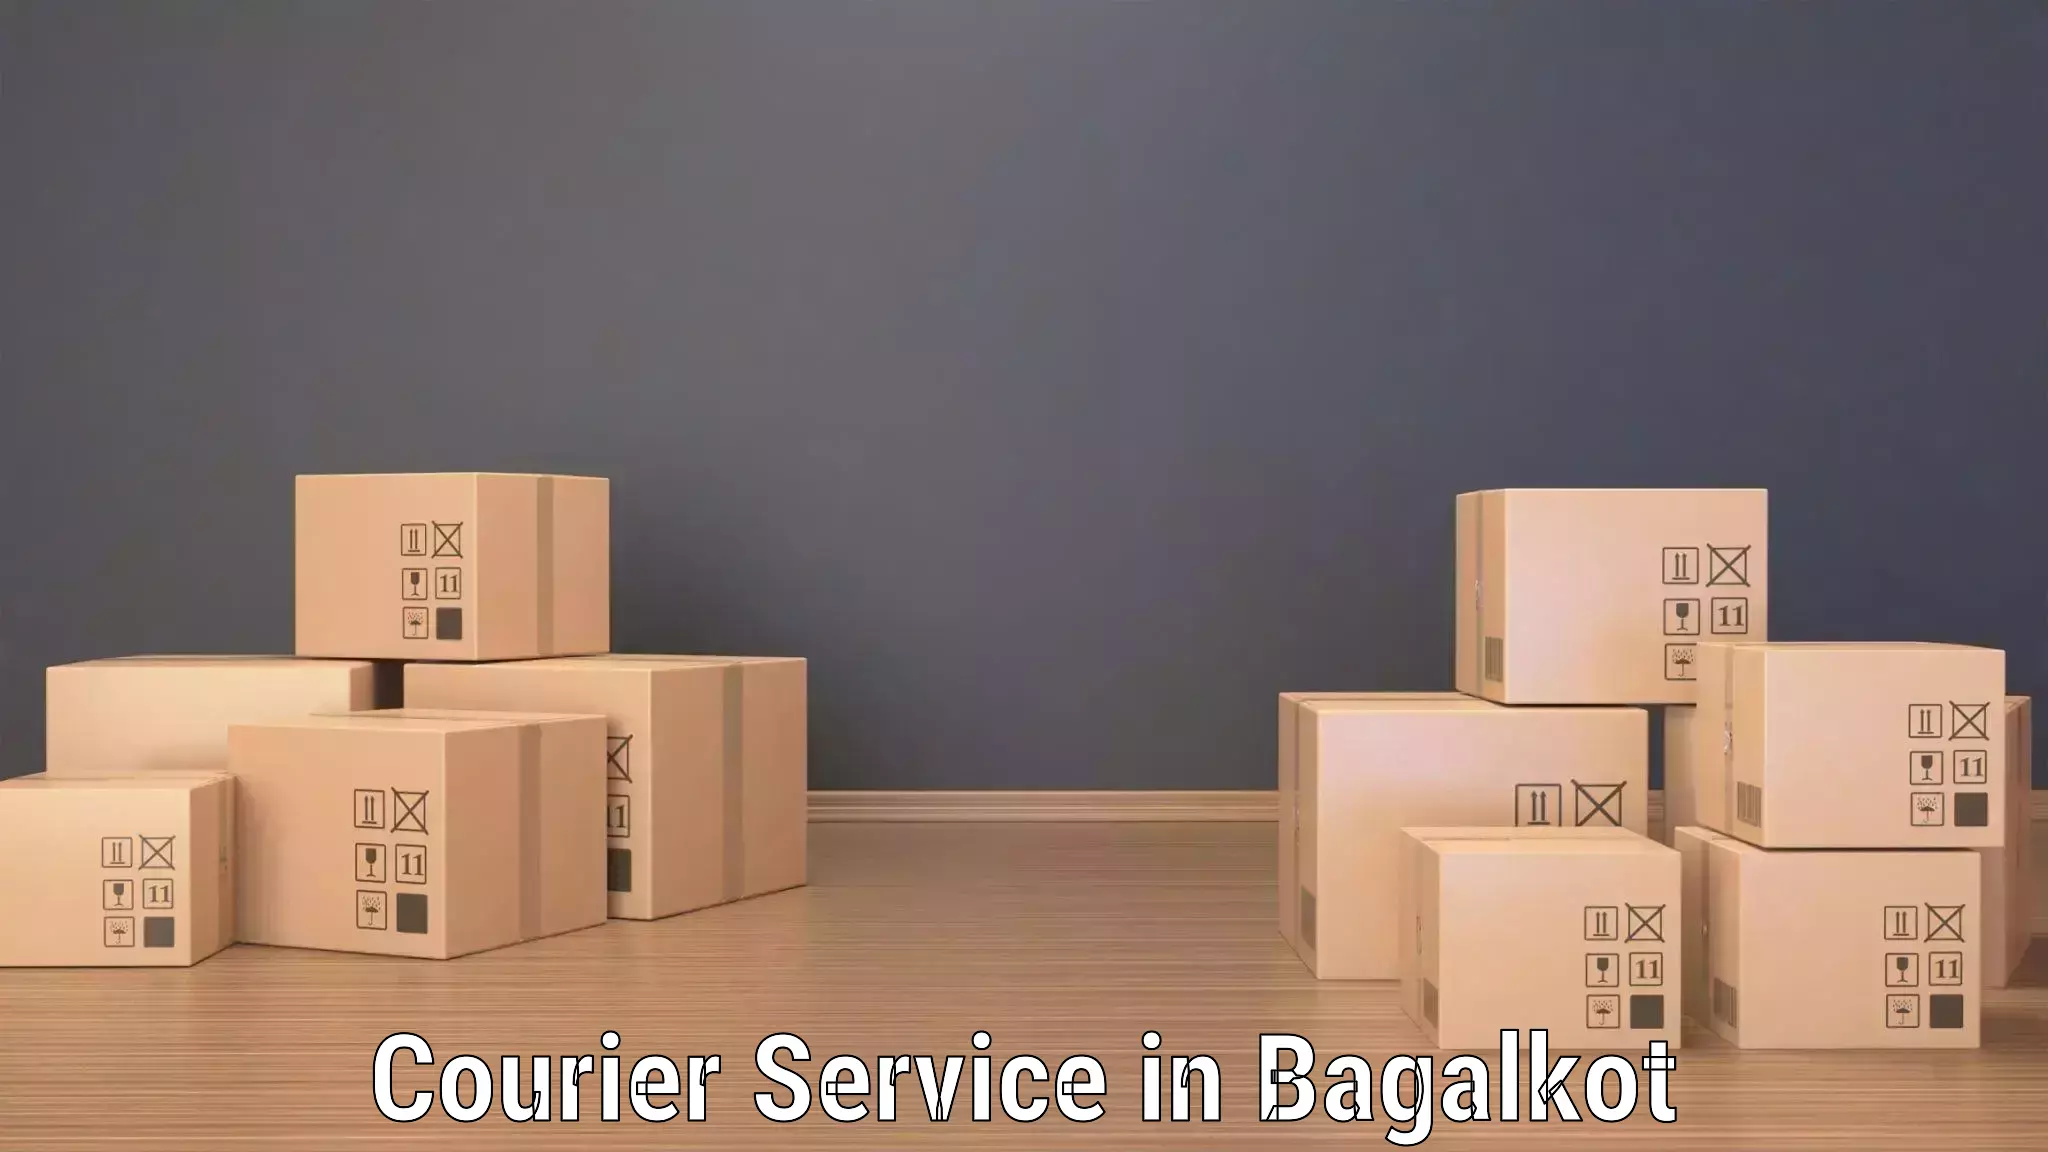 Express package services in Bagalkot